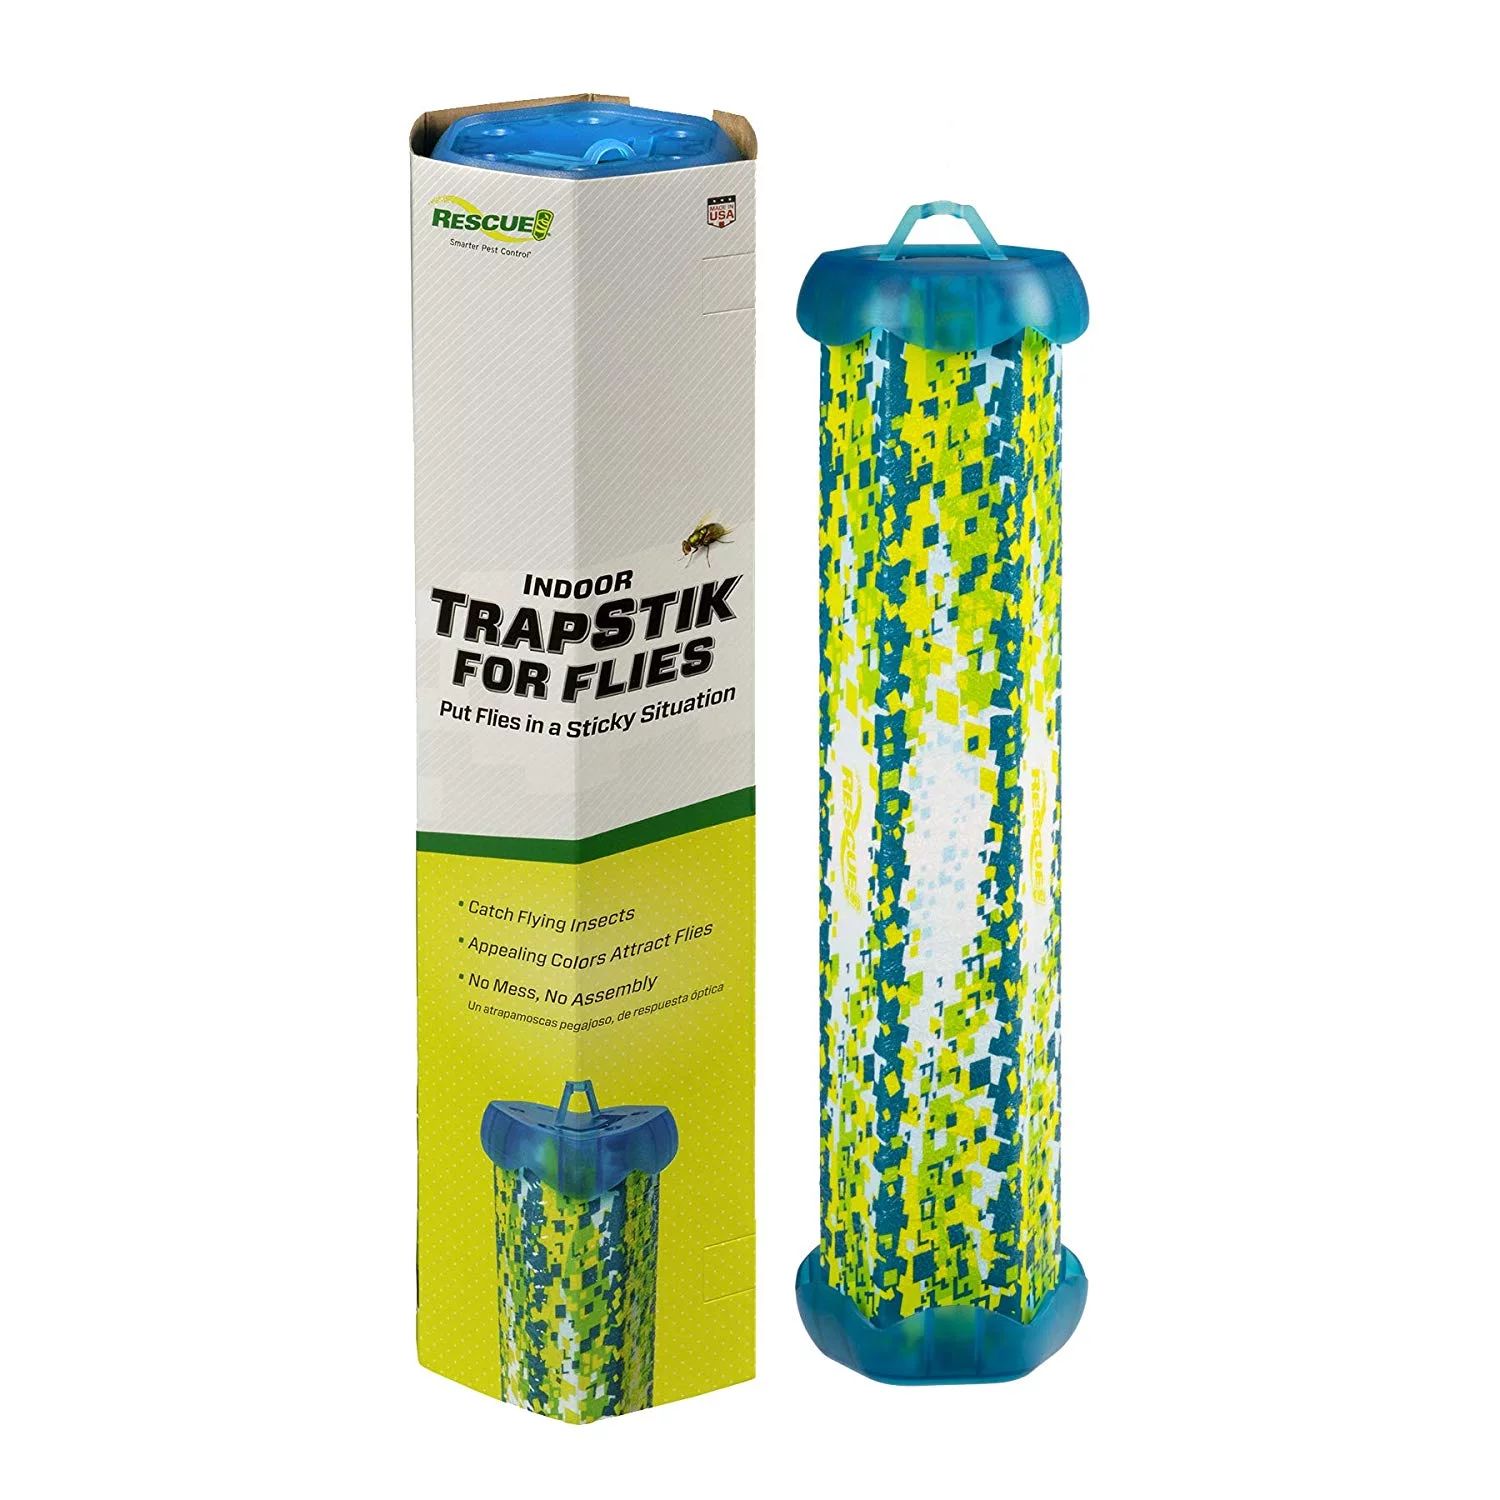 RESCUE! TrapStick Fly Trap, for Indoor Use, 1 Pack | Walmart (US)